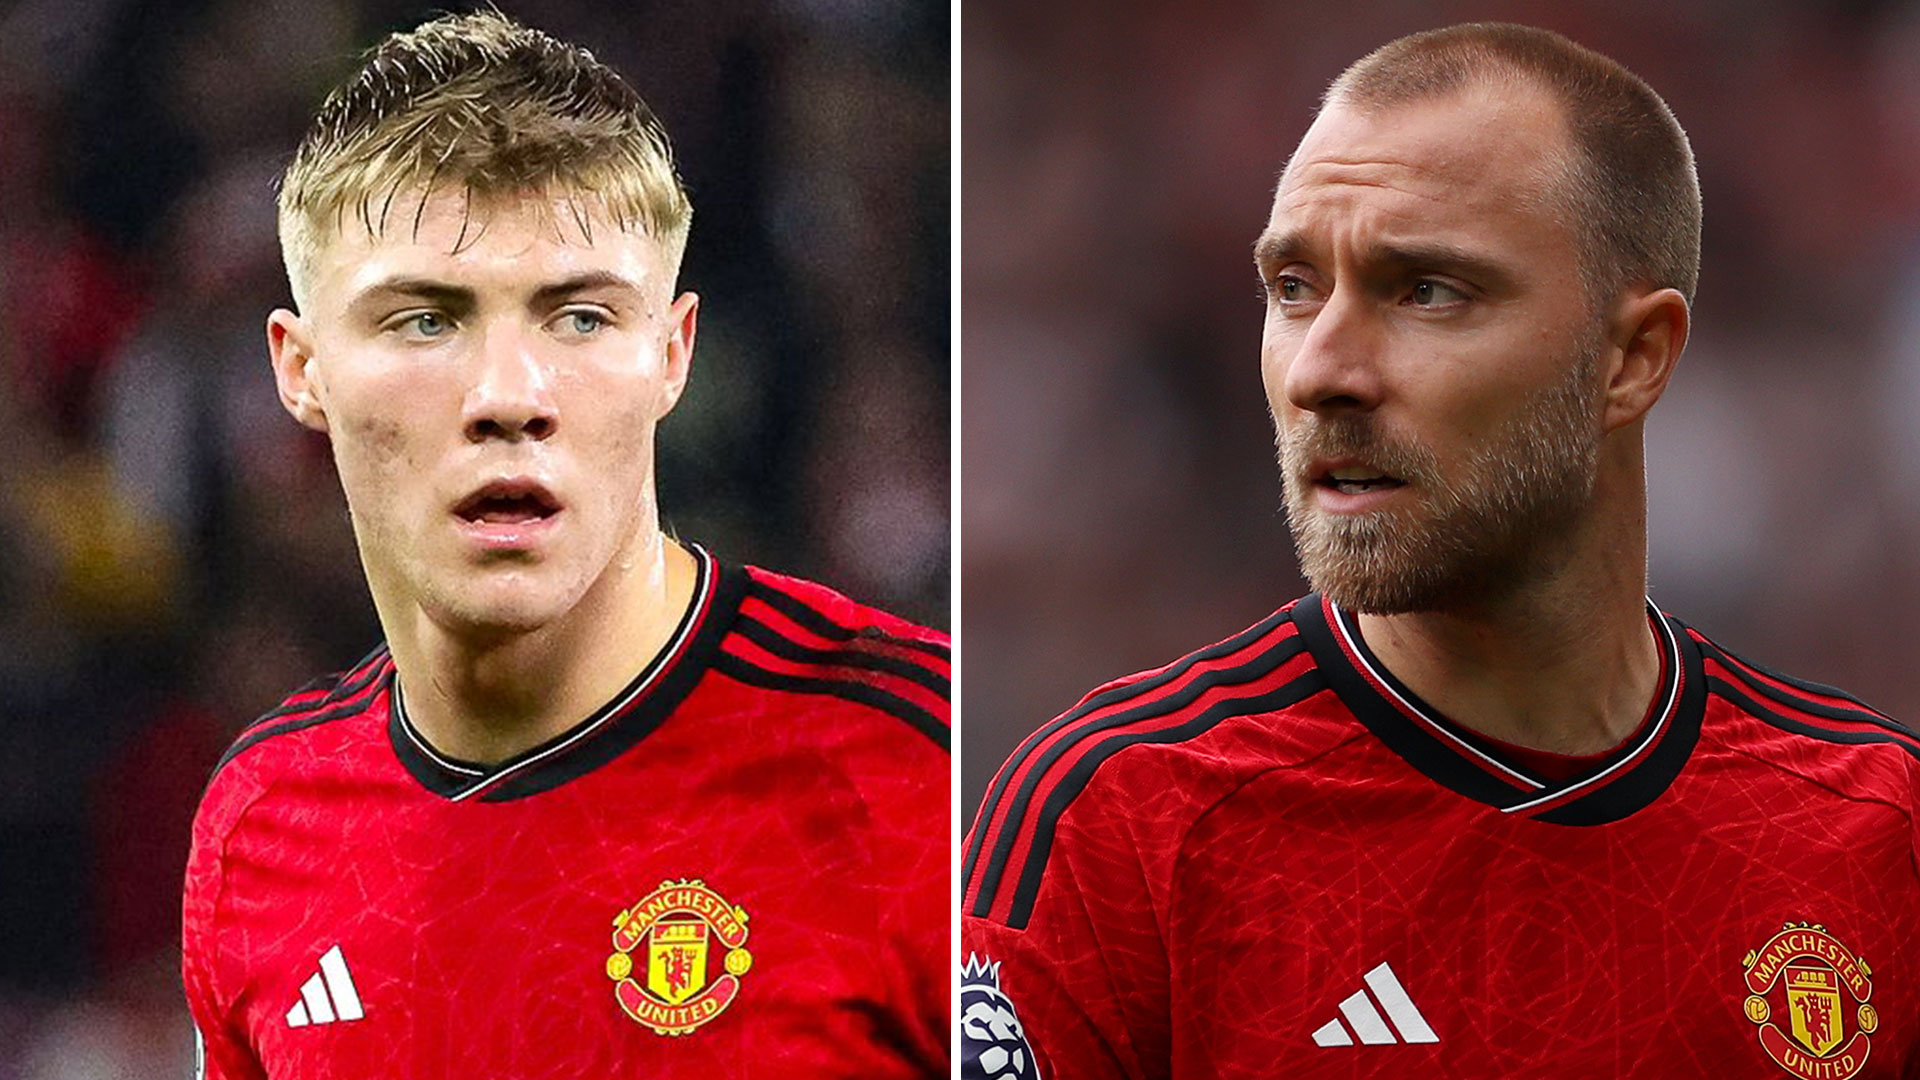 What Christian Eriksen said about goalless Rasmus Hojlund before he joined Man Utd was 'tell-tale sign' says Souness